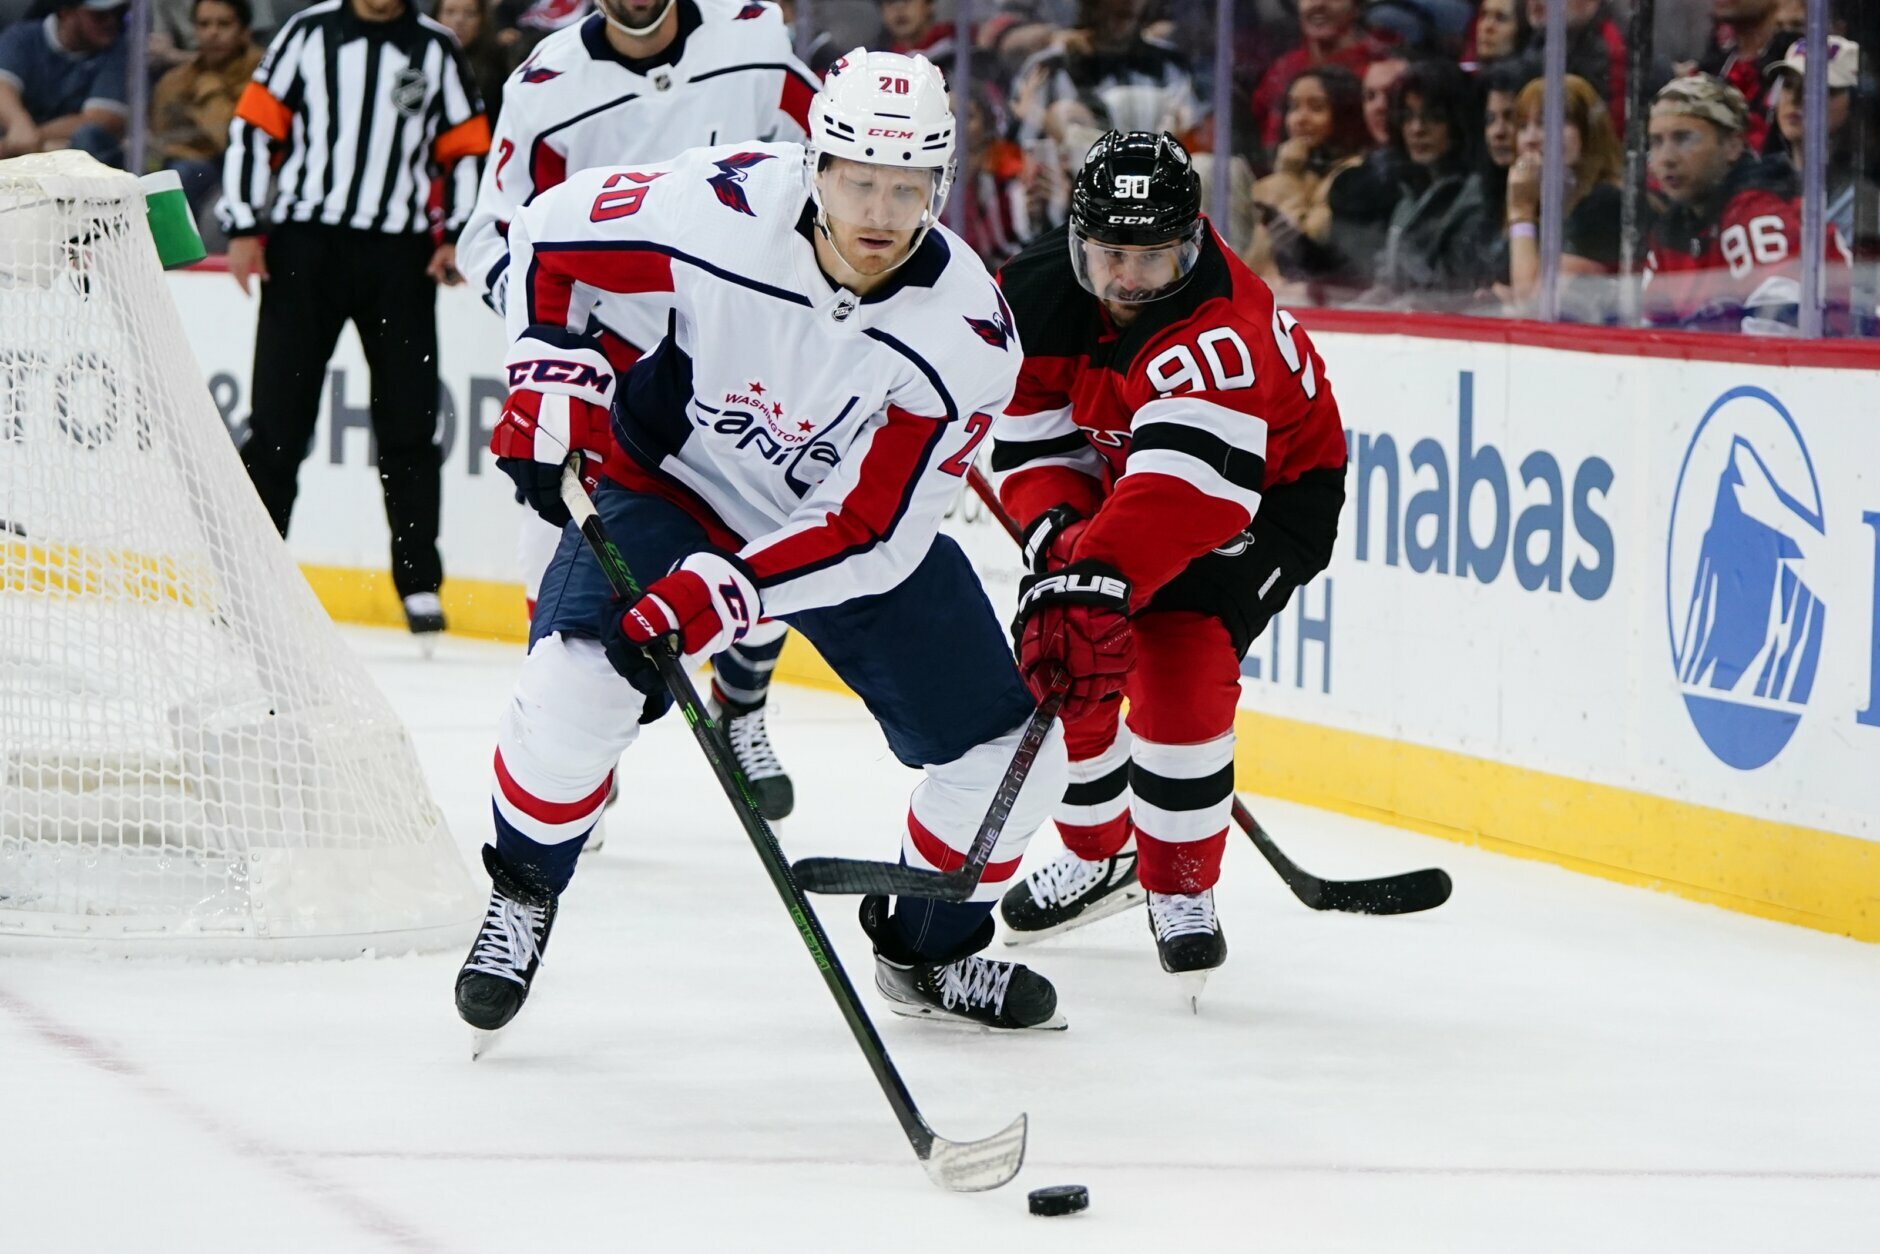 Washington Capitals' Lars Eller (20) and New Jersey Devils' Tomas Tatar (90) reach for the puck during the first period of an NHL hockey game Thursday, Oct. 21, 2021, in Newark, N.J. (AP Photo/Frank Franklin II)